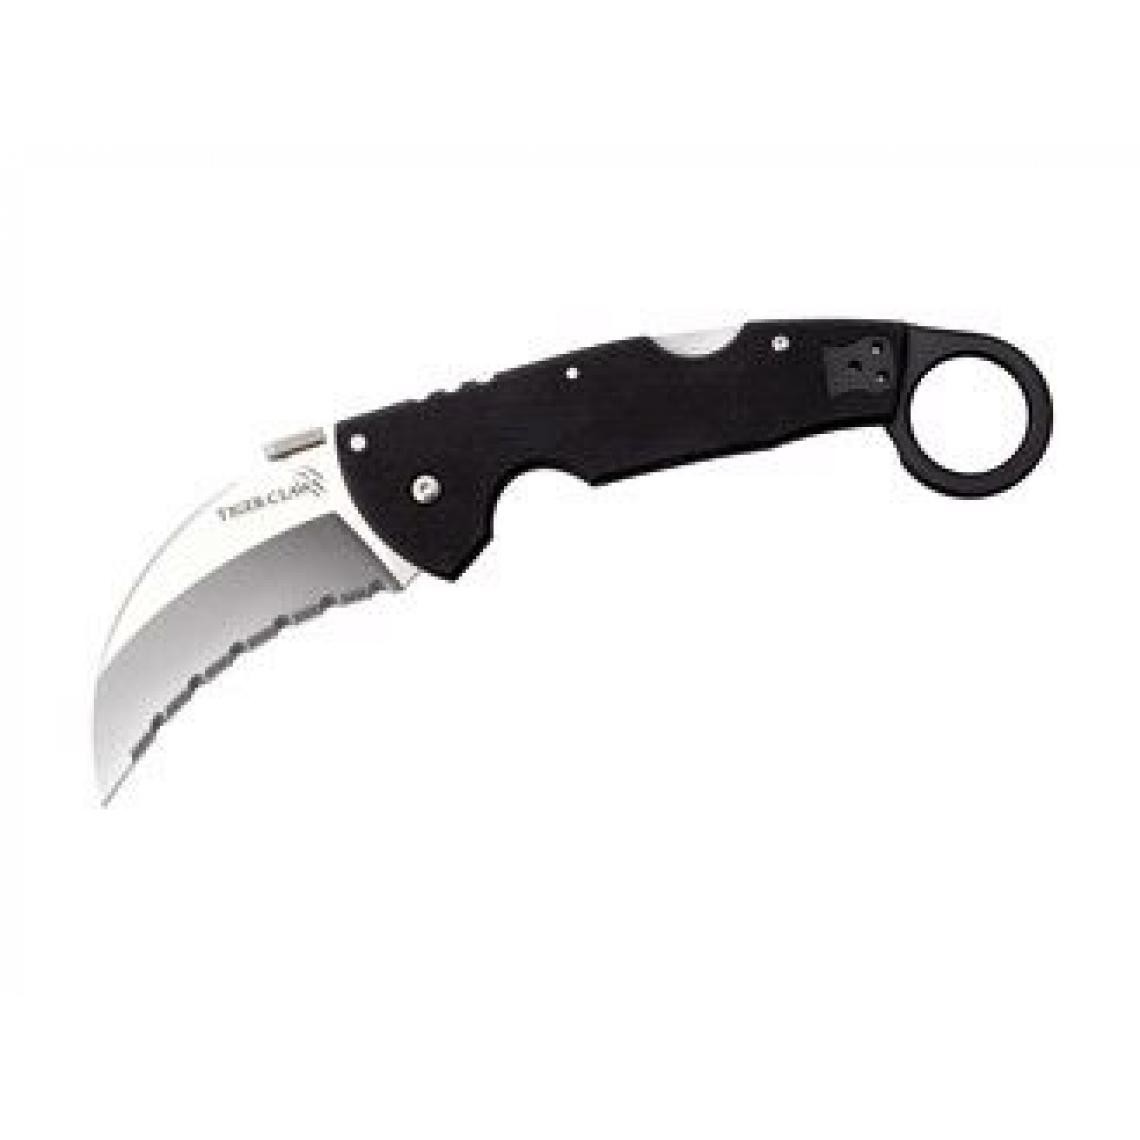 Divers Marques - Cold Steel TIGER CLAW SERRATED 22KFS - Outils de coupe